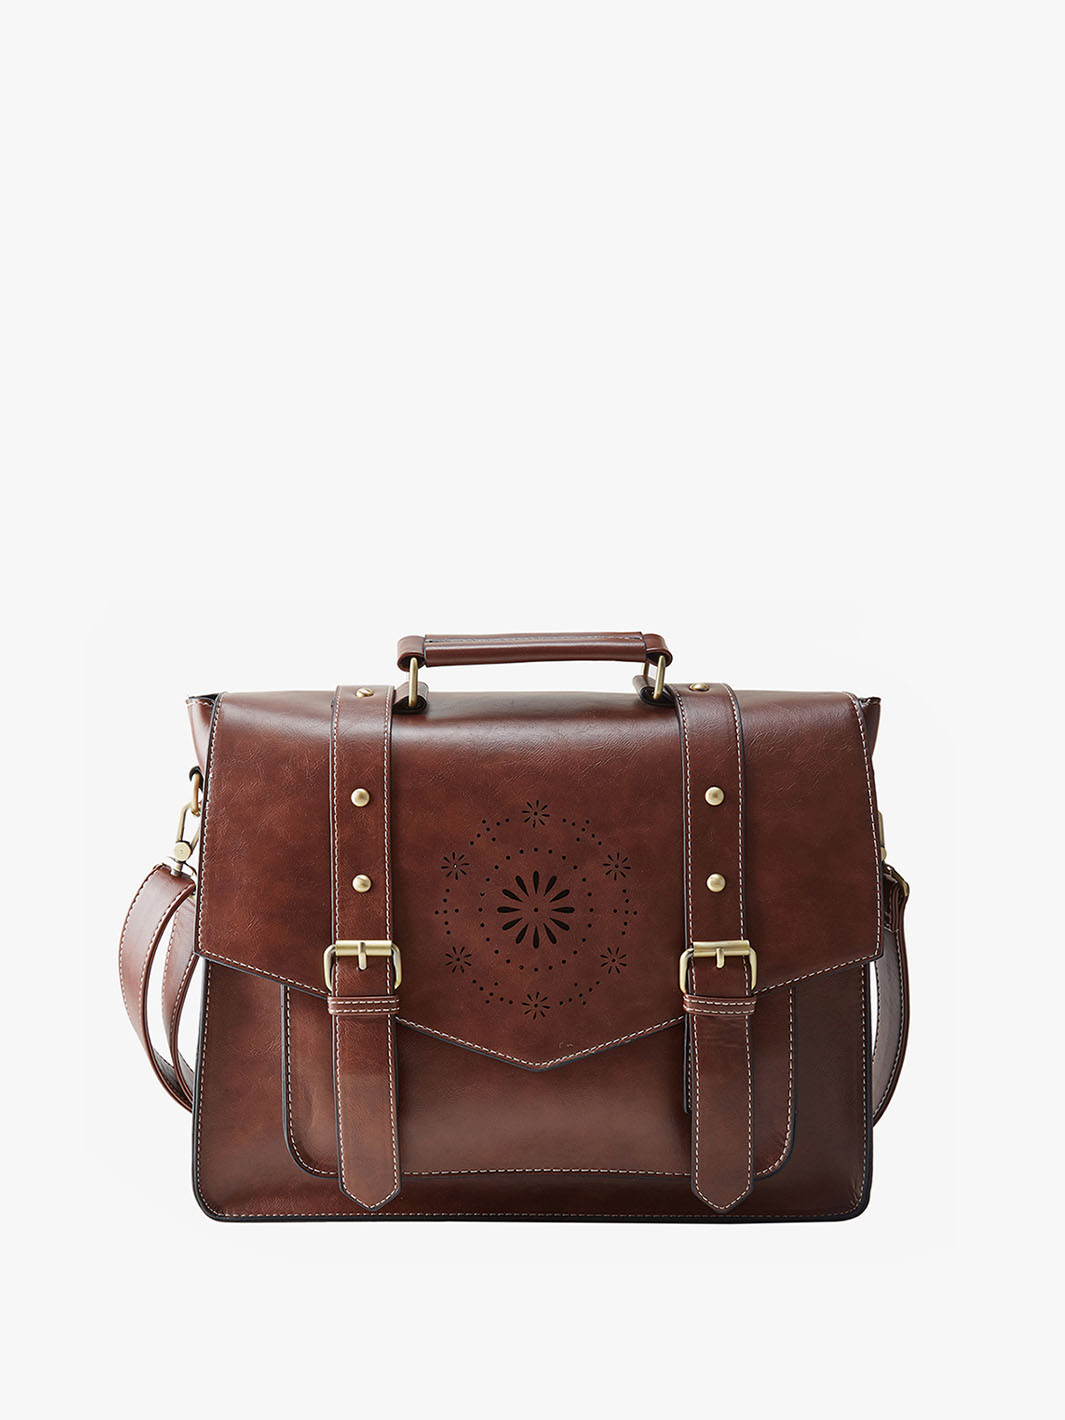 IULIA' Leather Briefcase by VICUS